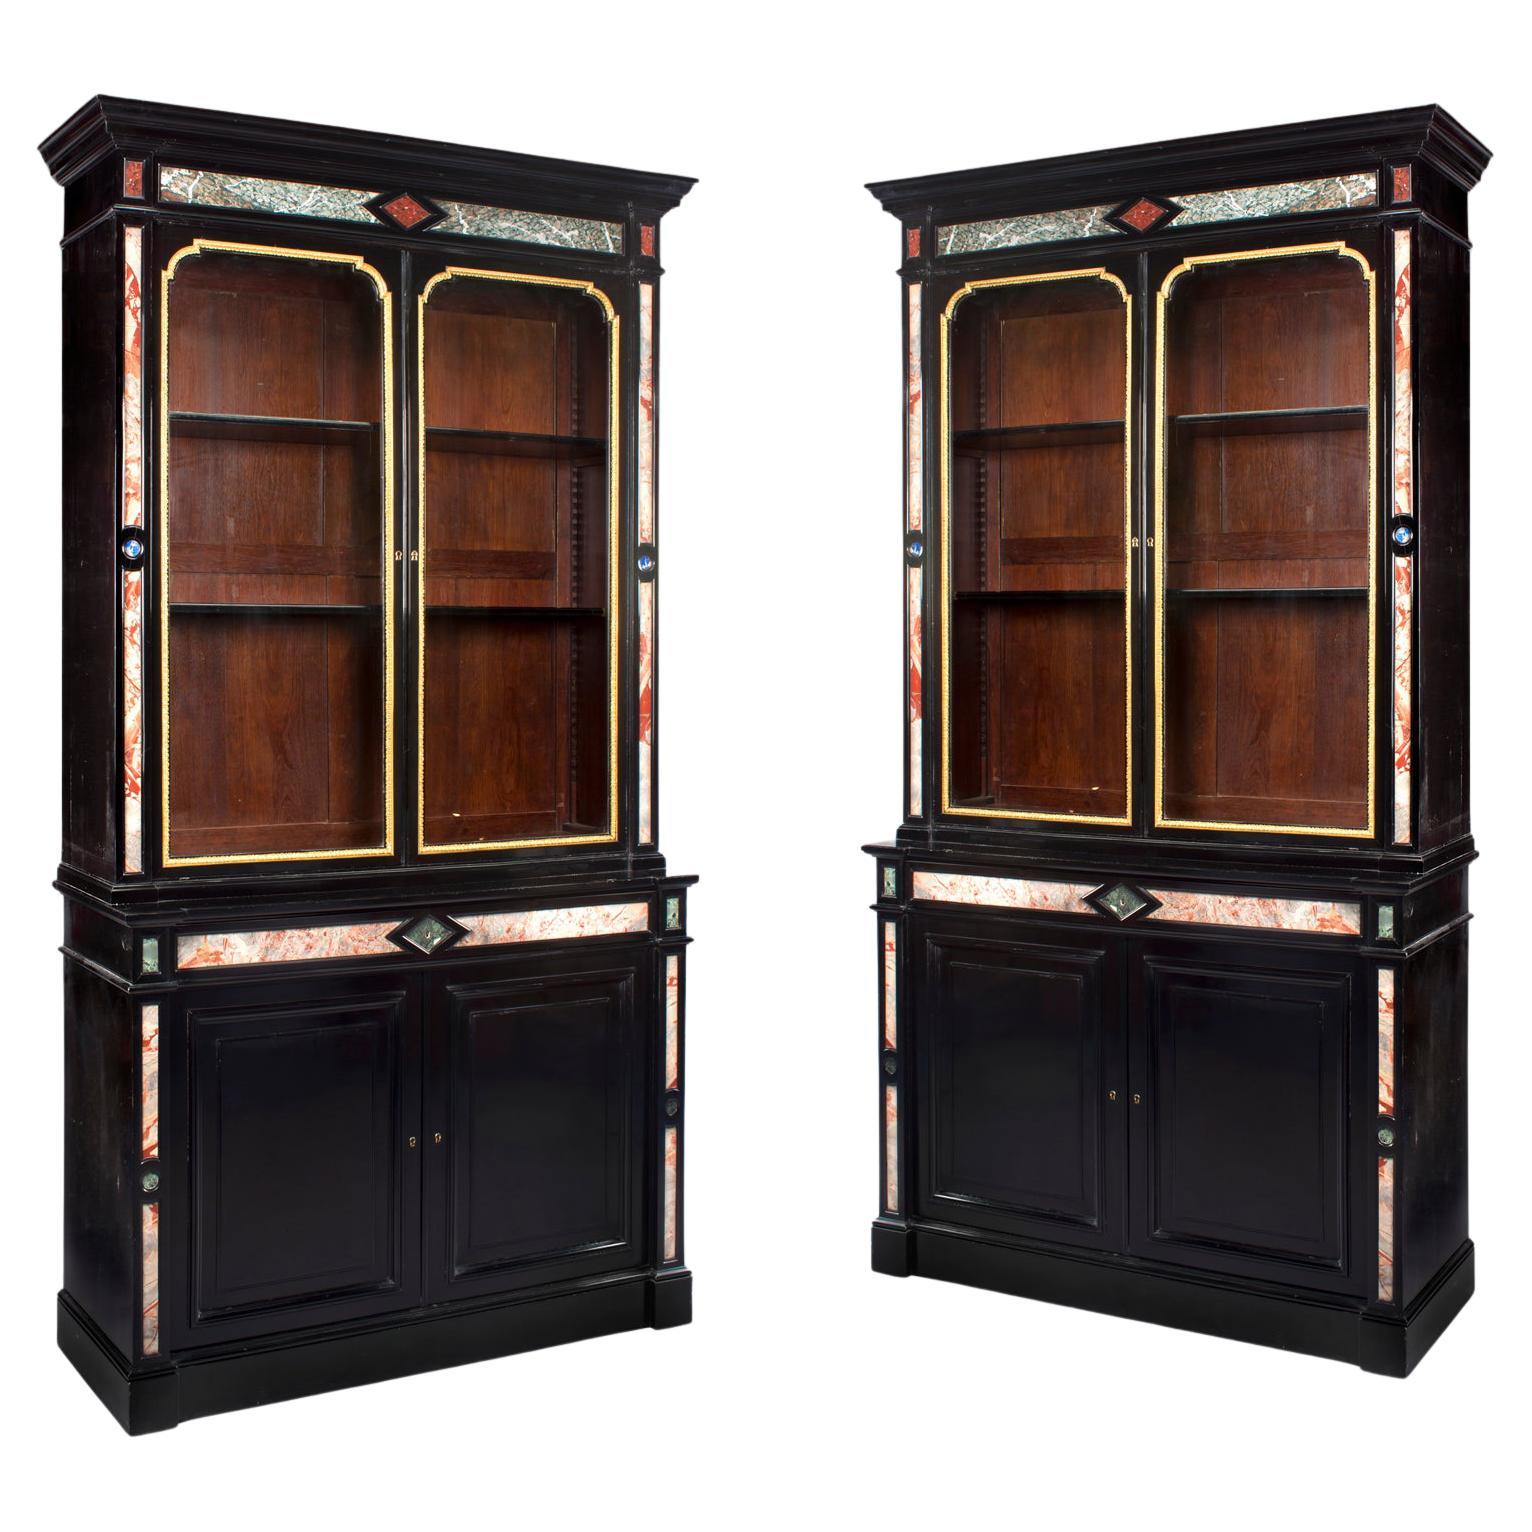 A Pair of Napoleon III Pietre Dure Bookcases For Sale